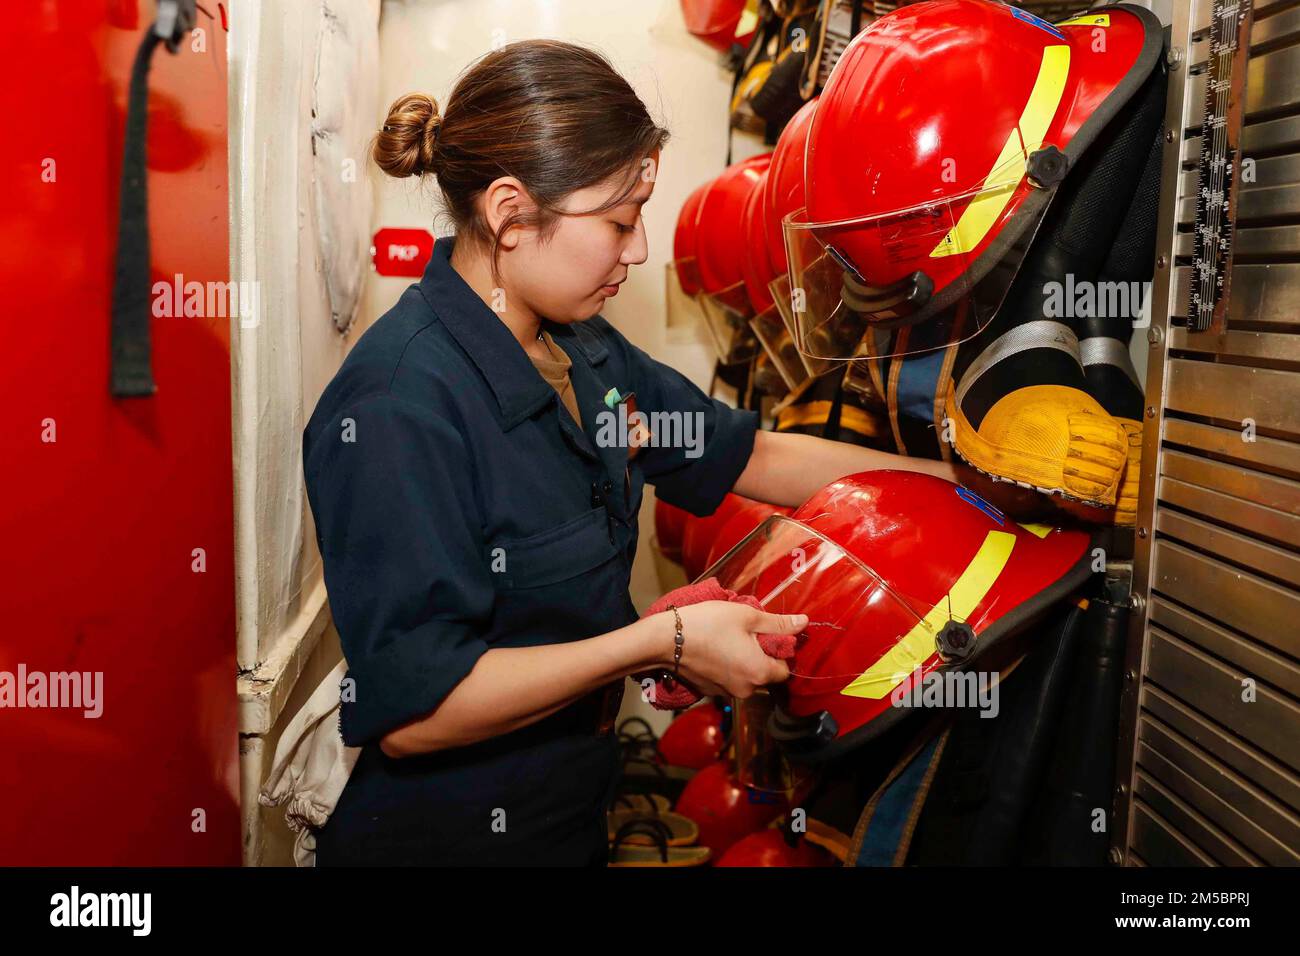 PHILIPPINE SEA (Feb. 24, 2022) Damage Controlman Fireman Michelle Romo, from Rancho Cucamonga, Calif., inspects firefighting equipment in a repair locker aboard the Nimitz-class aircraft carrier USS Abraham Lincoln (CVN 72). Abraham Lincoln Strike Group is on a scheduled deployment in the U.S. 7th Fleet area of operations to enhance interoperability through alliances and partnerships while serving as a ready-response force in support of a free and open Indo-Pacific region. Stock Photo